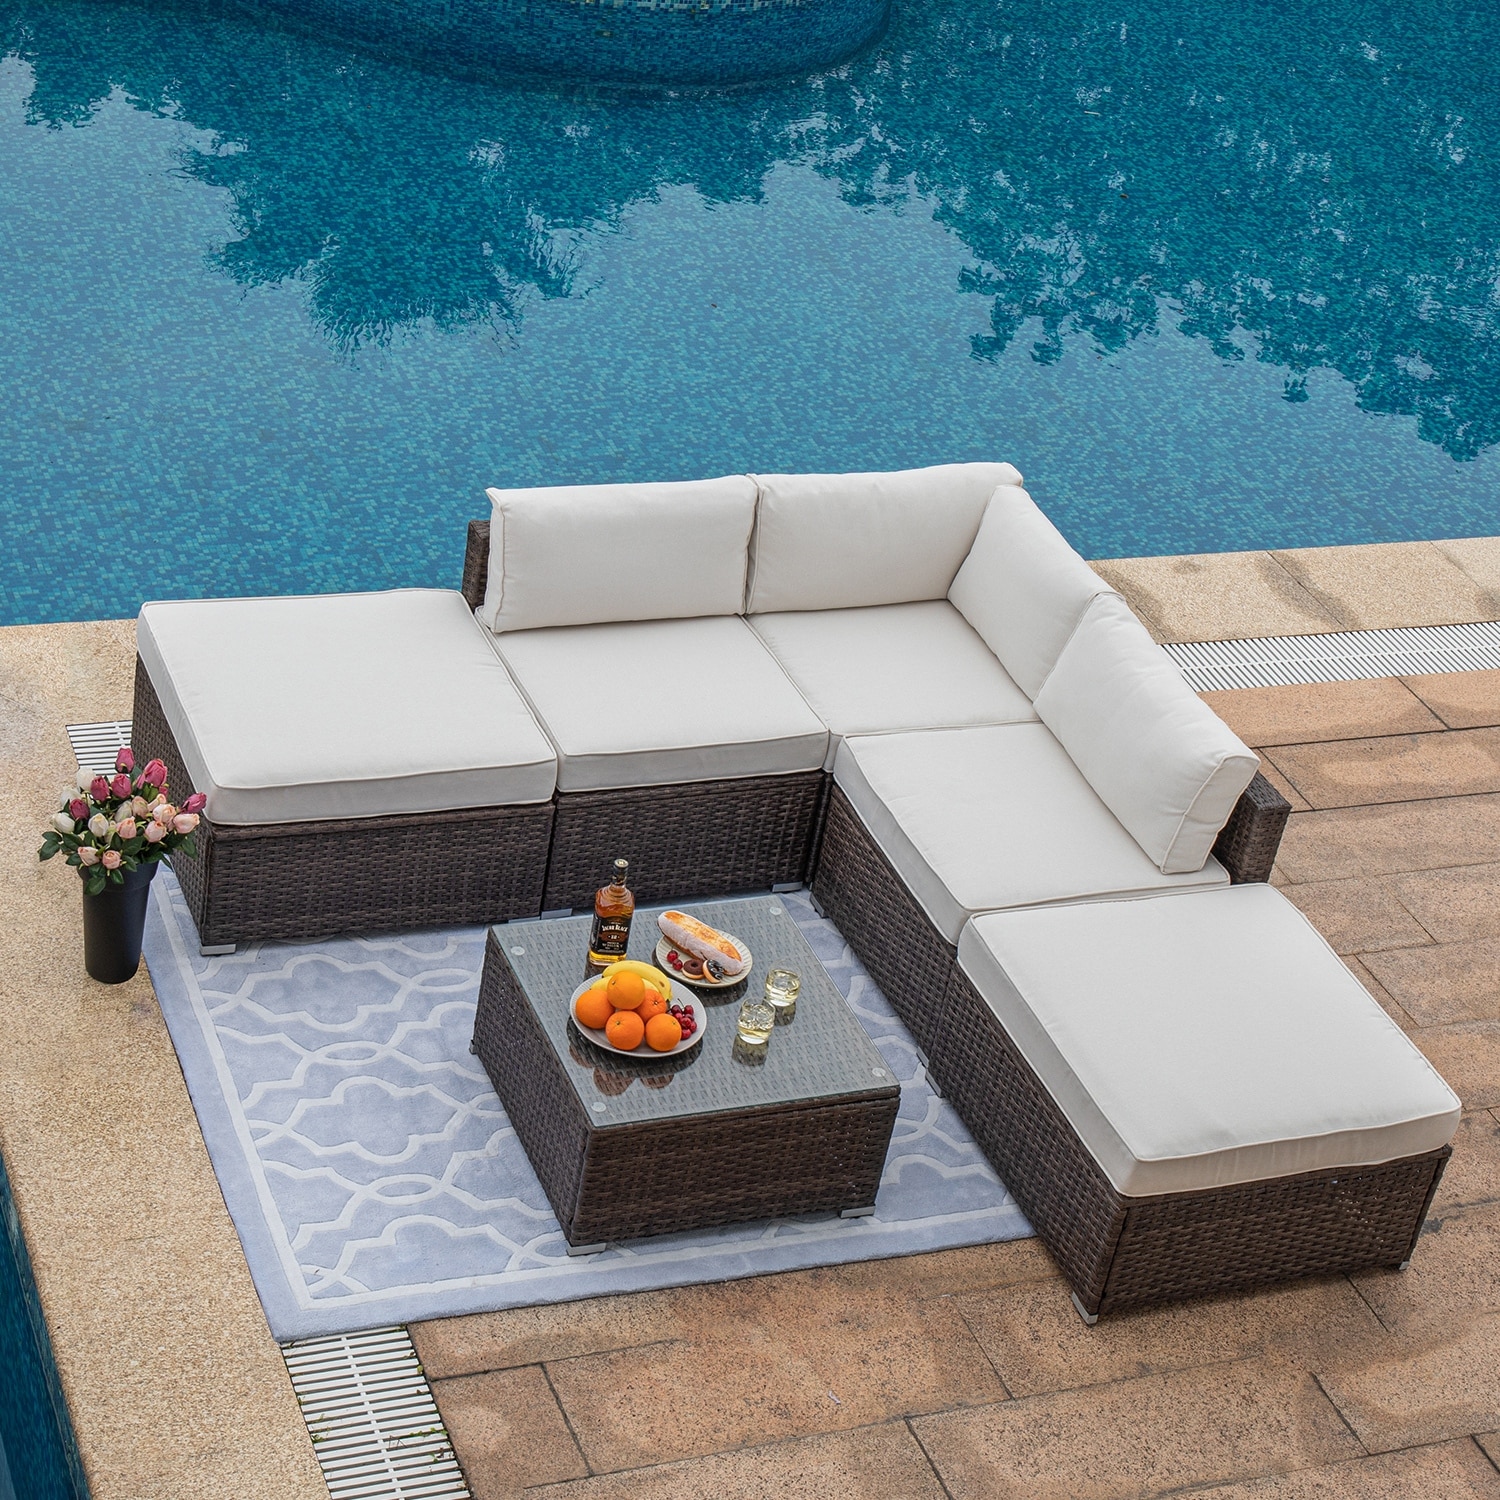 Cosiest 6-piece Off-white Outdoor Furniture Patio Wicker Sectional Sofa Set With Coffee Table